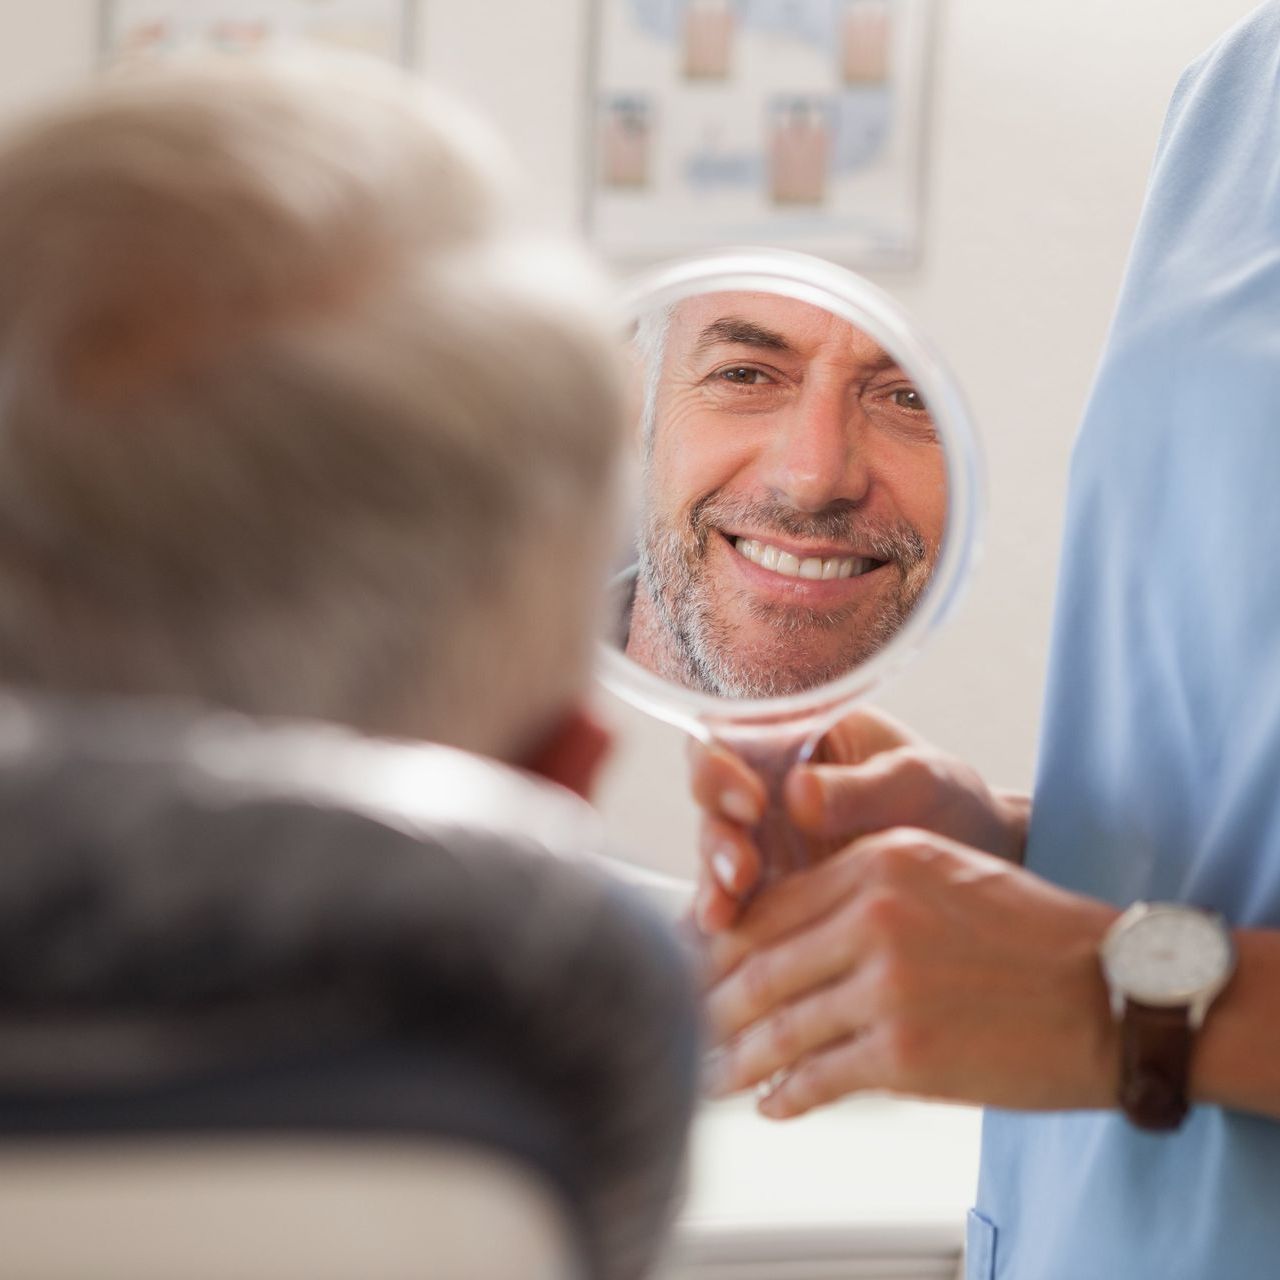 An image of a middle aged man in a dental office smiling while looking at his reflecting in a mirror